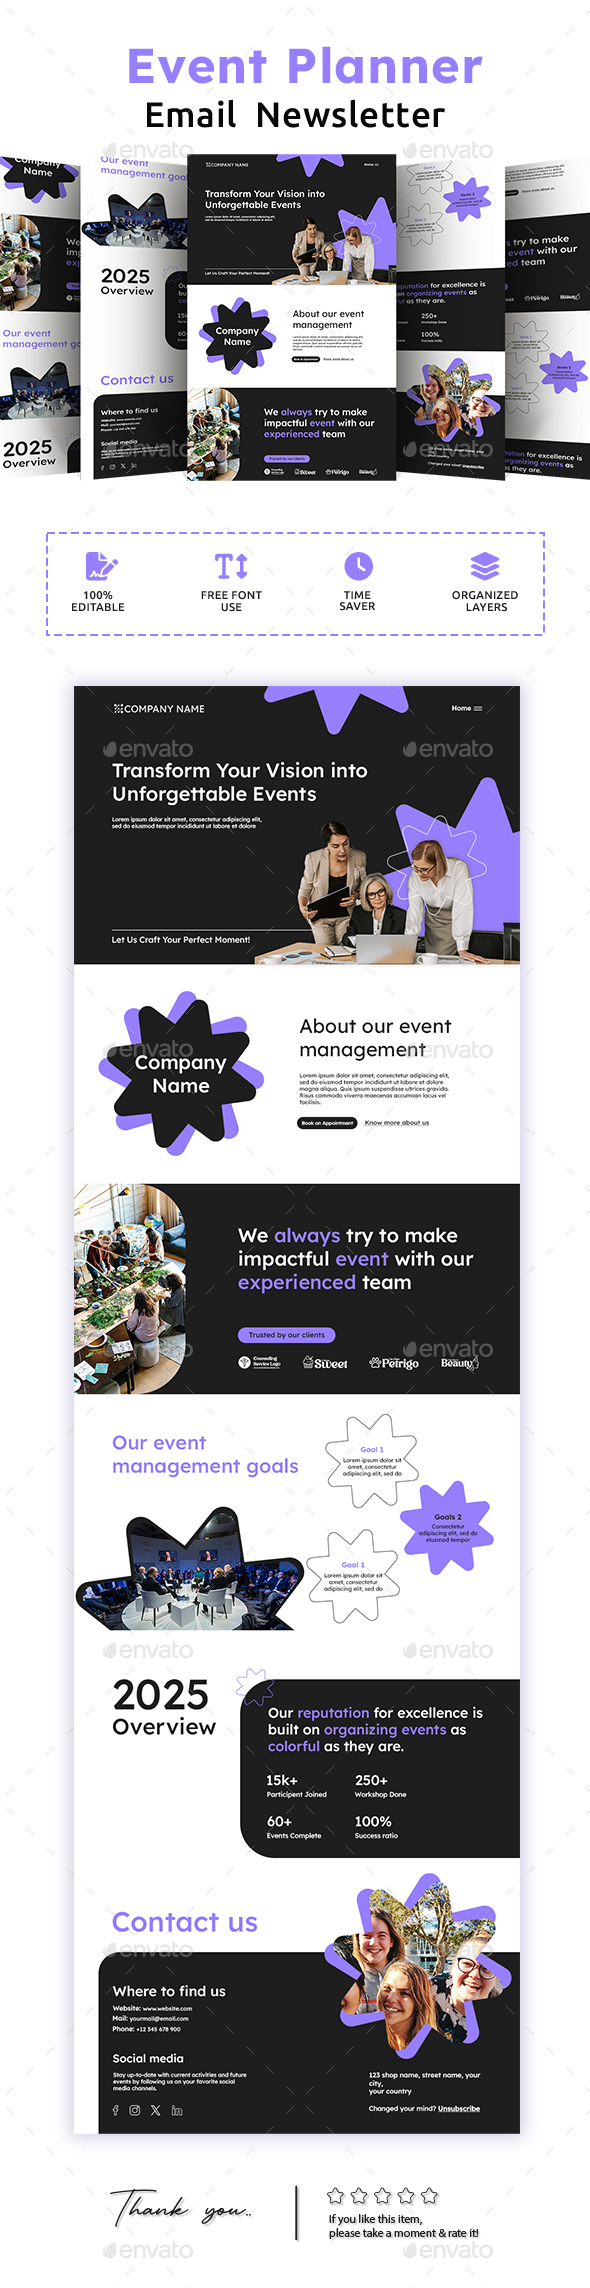 [DOWNLOAD]Event Management Email Newsletter PSD Template